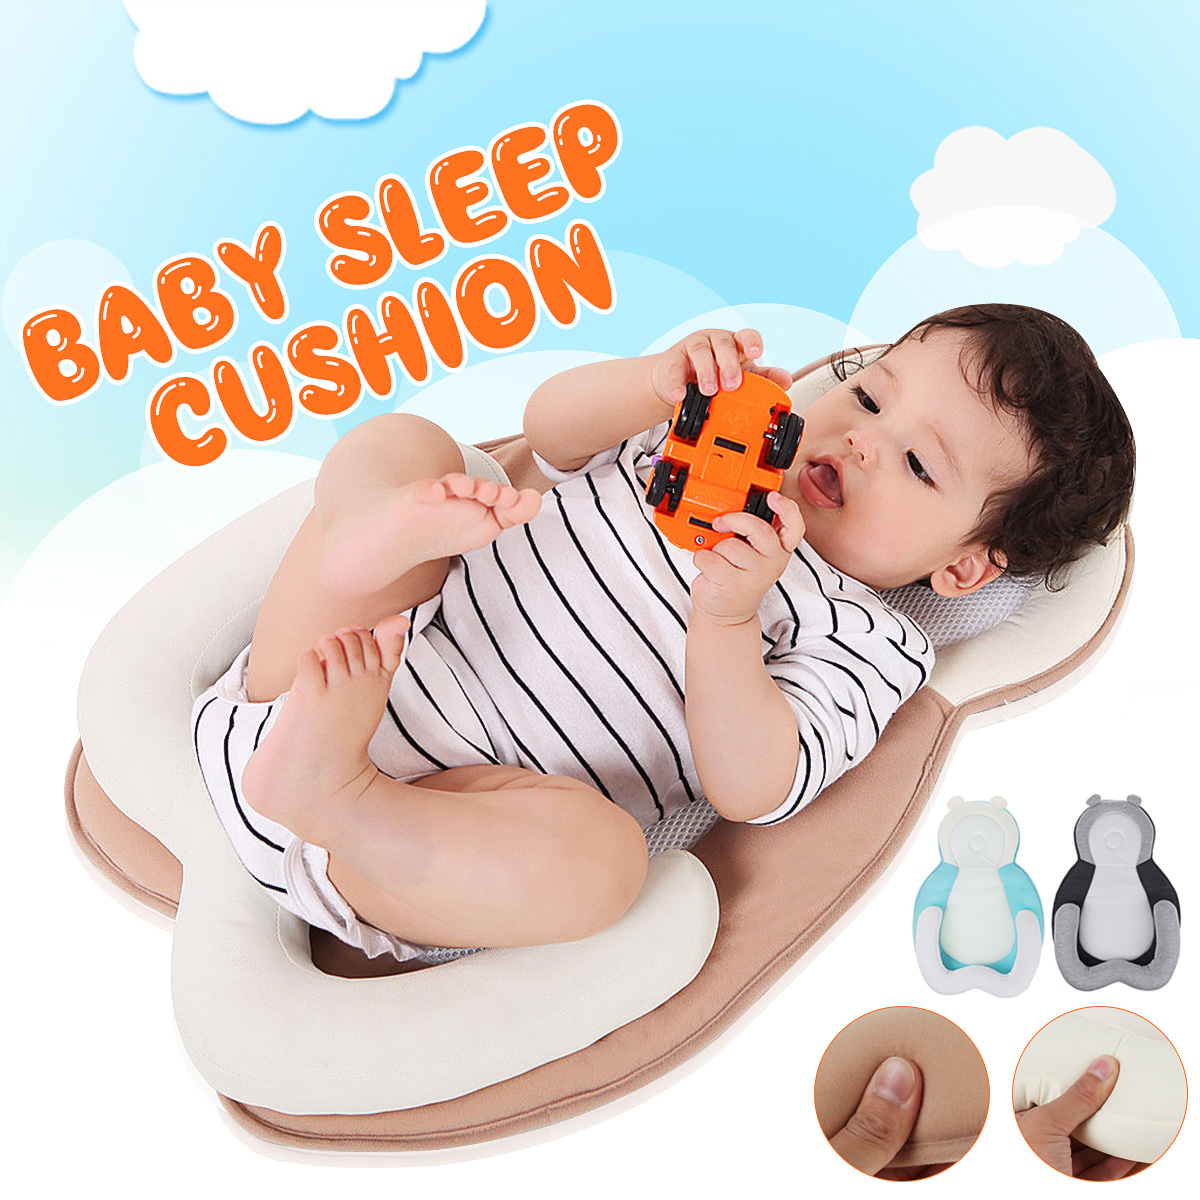 24-x-16-Baby-Sleep-Stereotypes-Pillow-Anti-Rollover-Flat-Head-Positioning-Pillow-Infant-Stereotypes--1957307-1